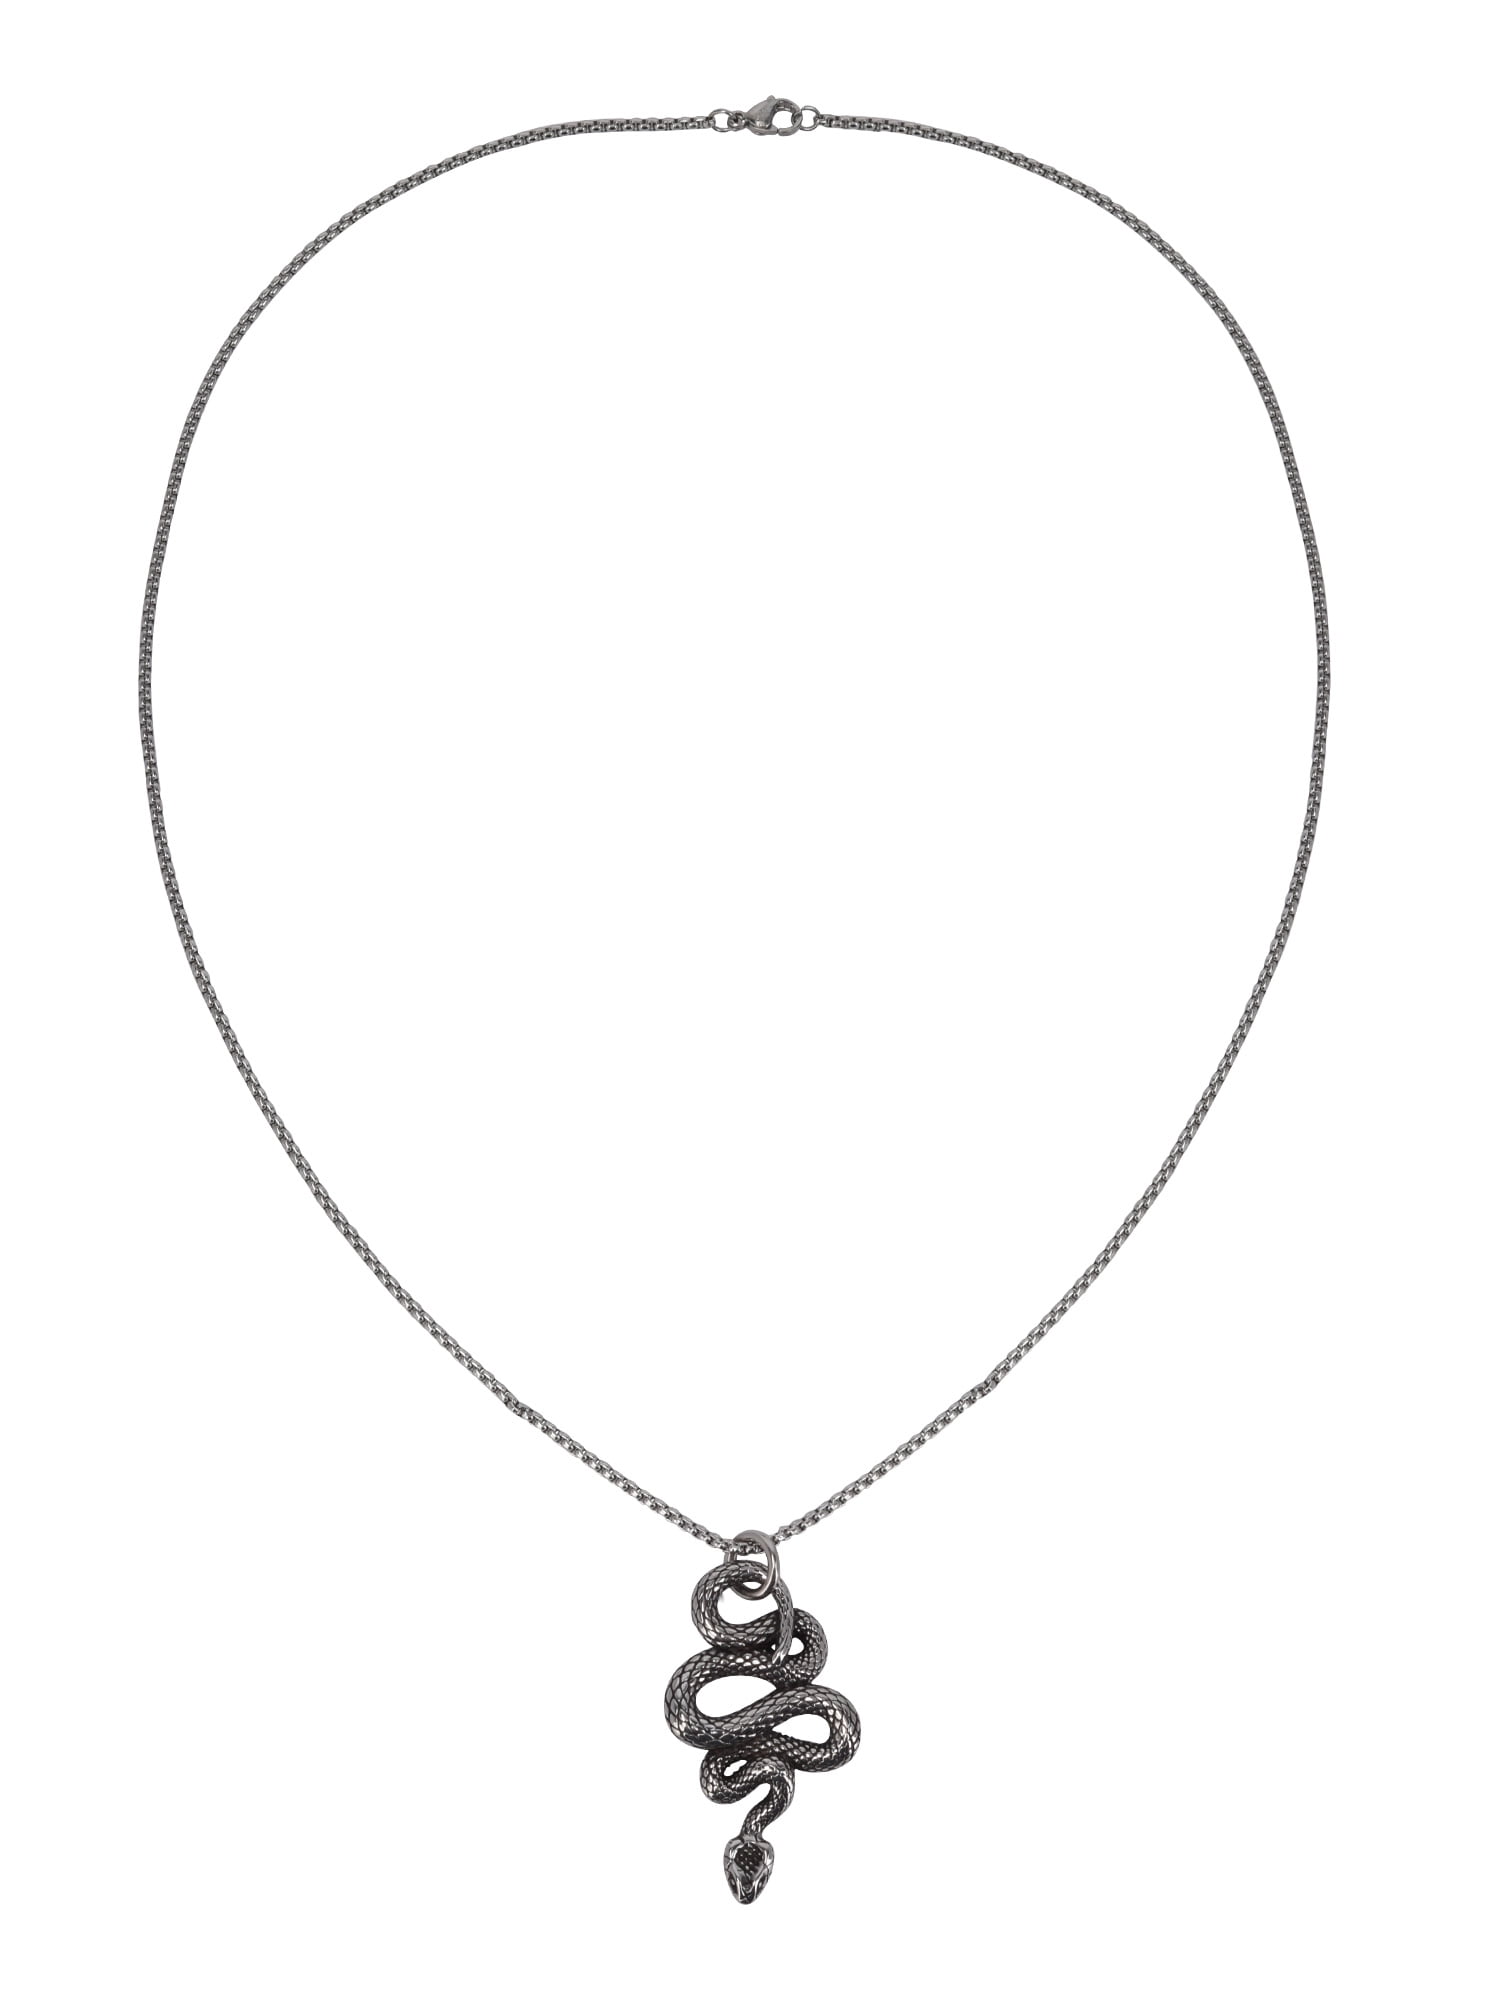 Believe by Brilliance Stainless Steel Men's Textured Snake Necklace